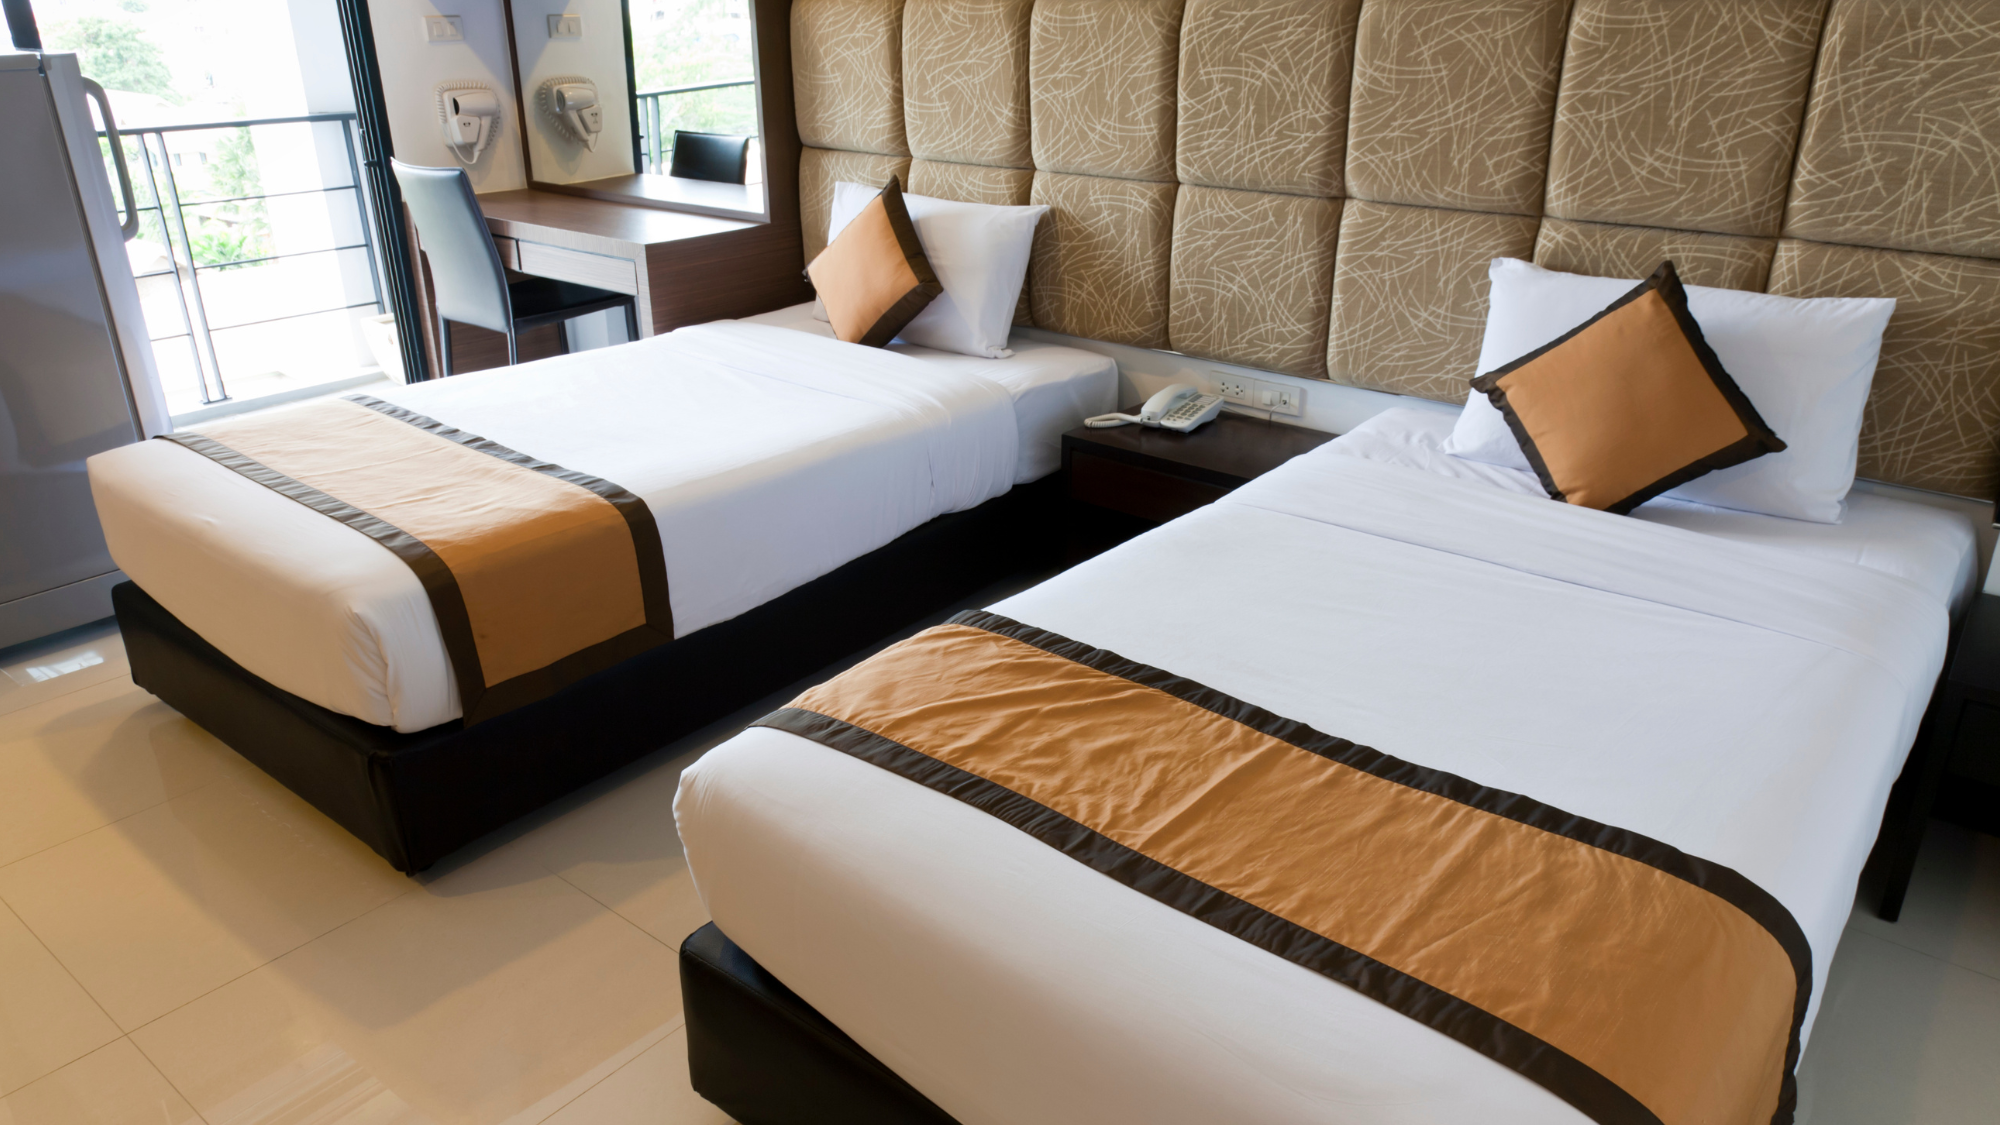 Two twin-size beds in a hotel room.